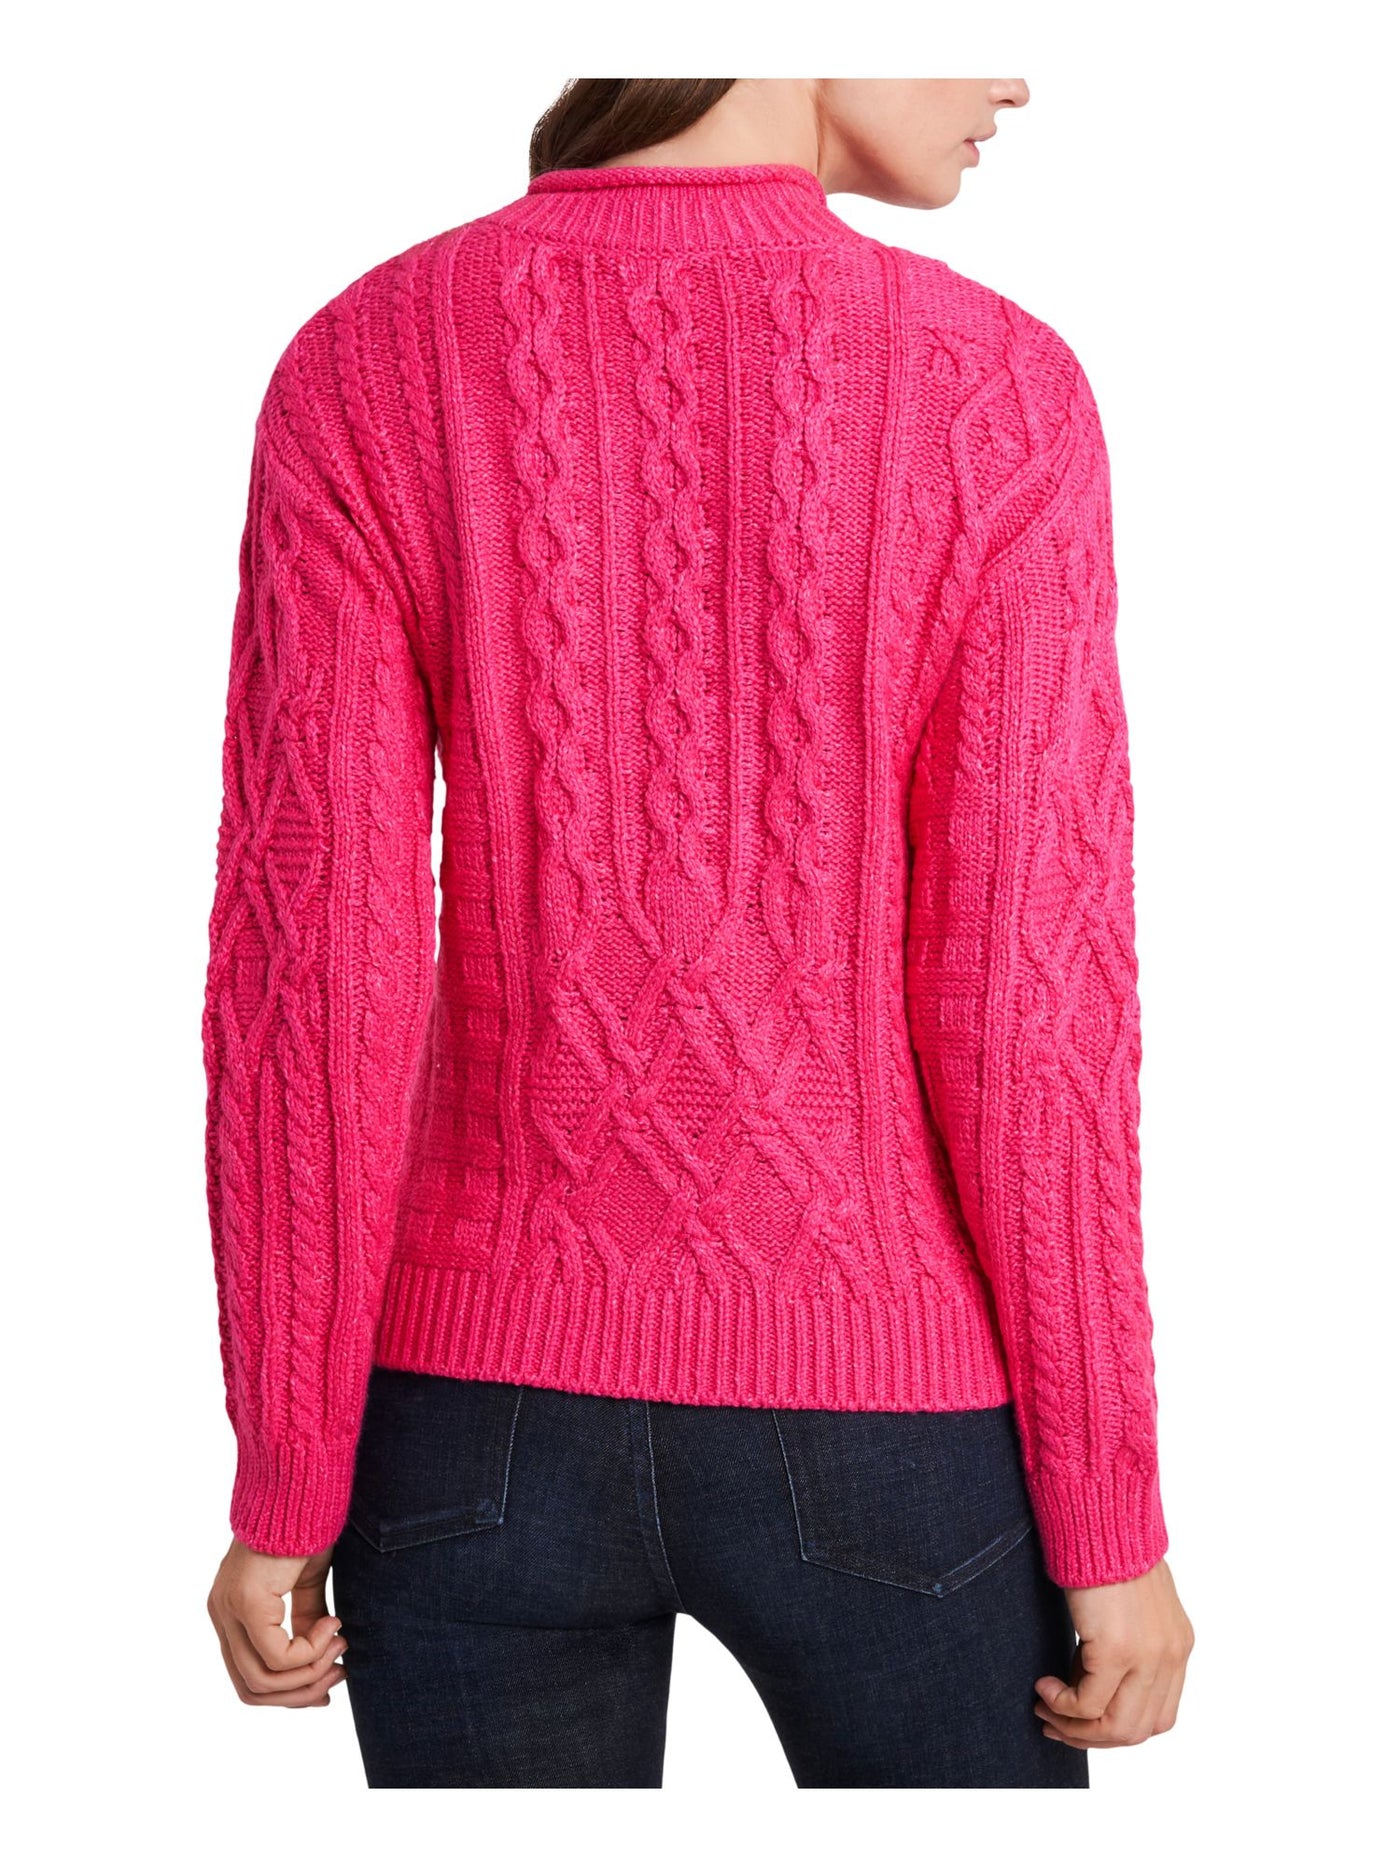 RILEY&RAE Womens Pink Long Sleeve Crew Neck Sweater XS